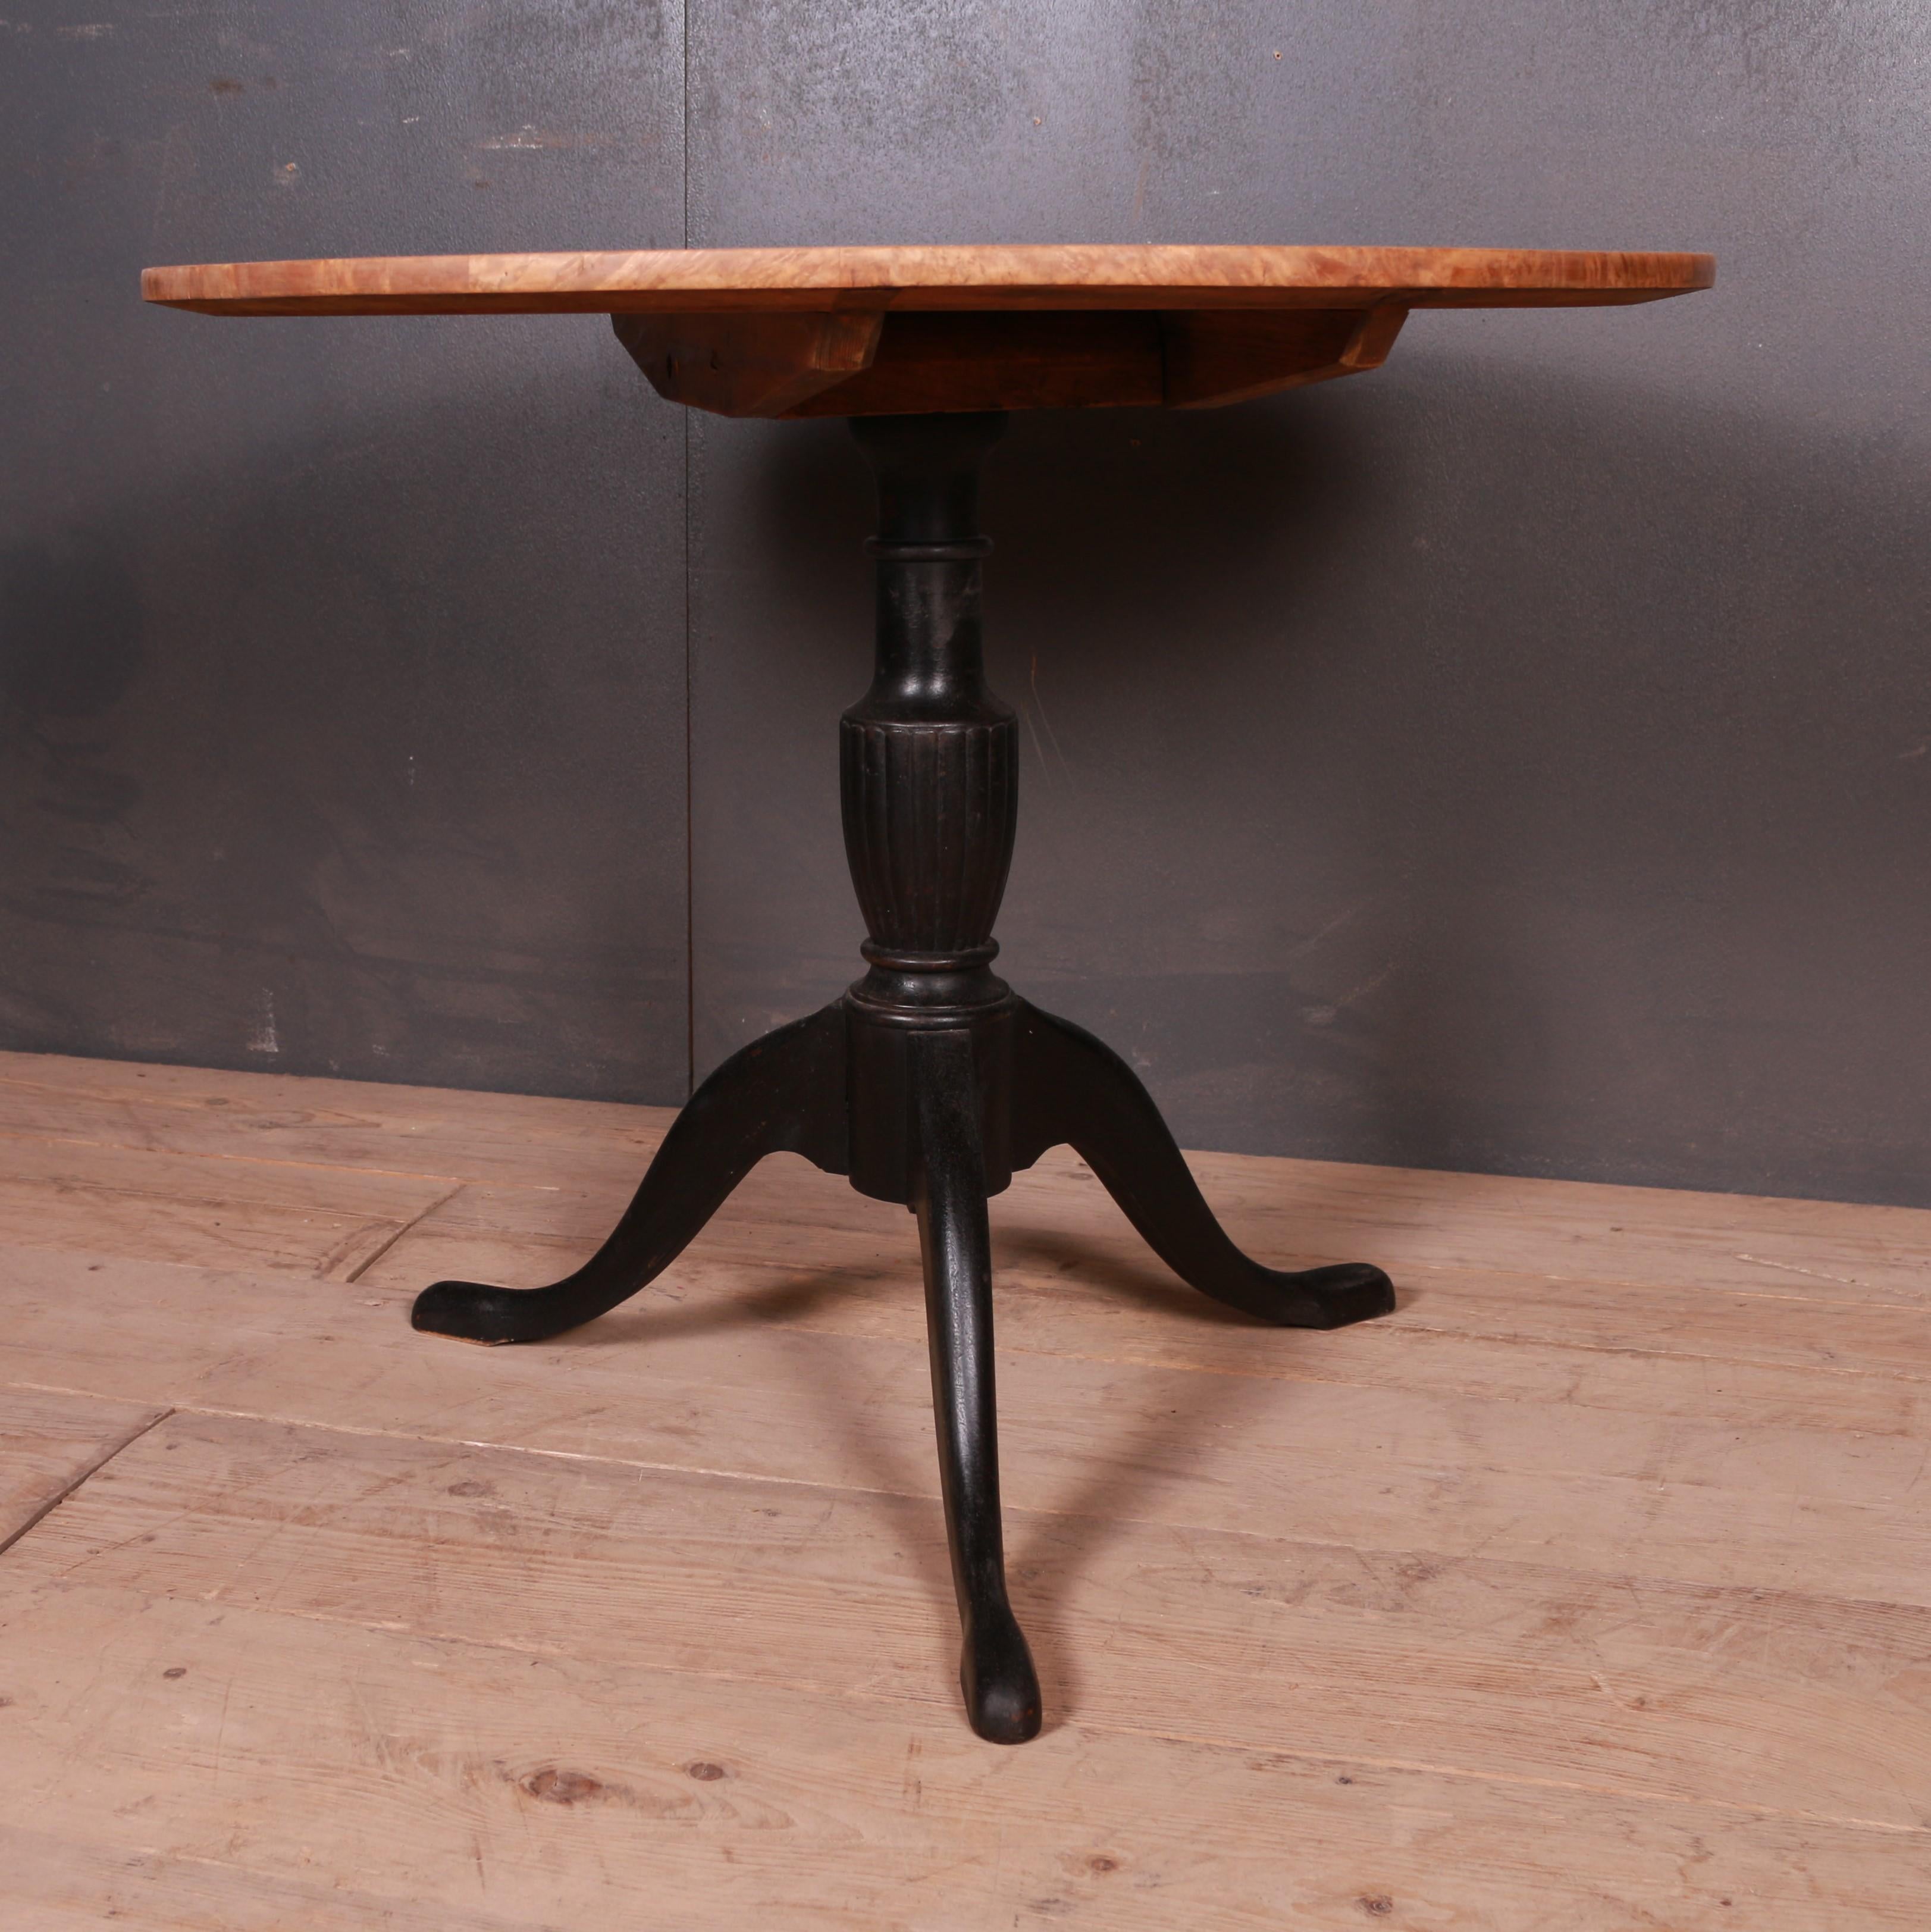 19th century Swedish tripod lamp table with a walnut veneer top, 1890

Dimensions:
26 inches (66 cms) high
31.5 inches (80 cms) diameter.

  